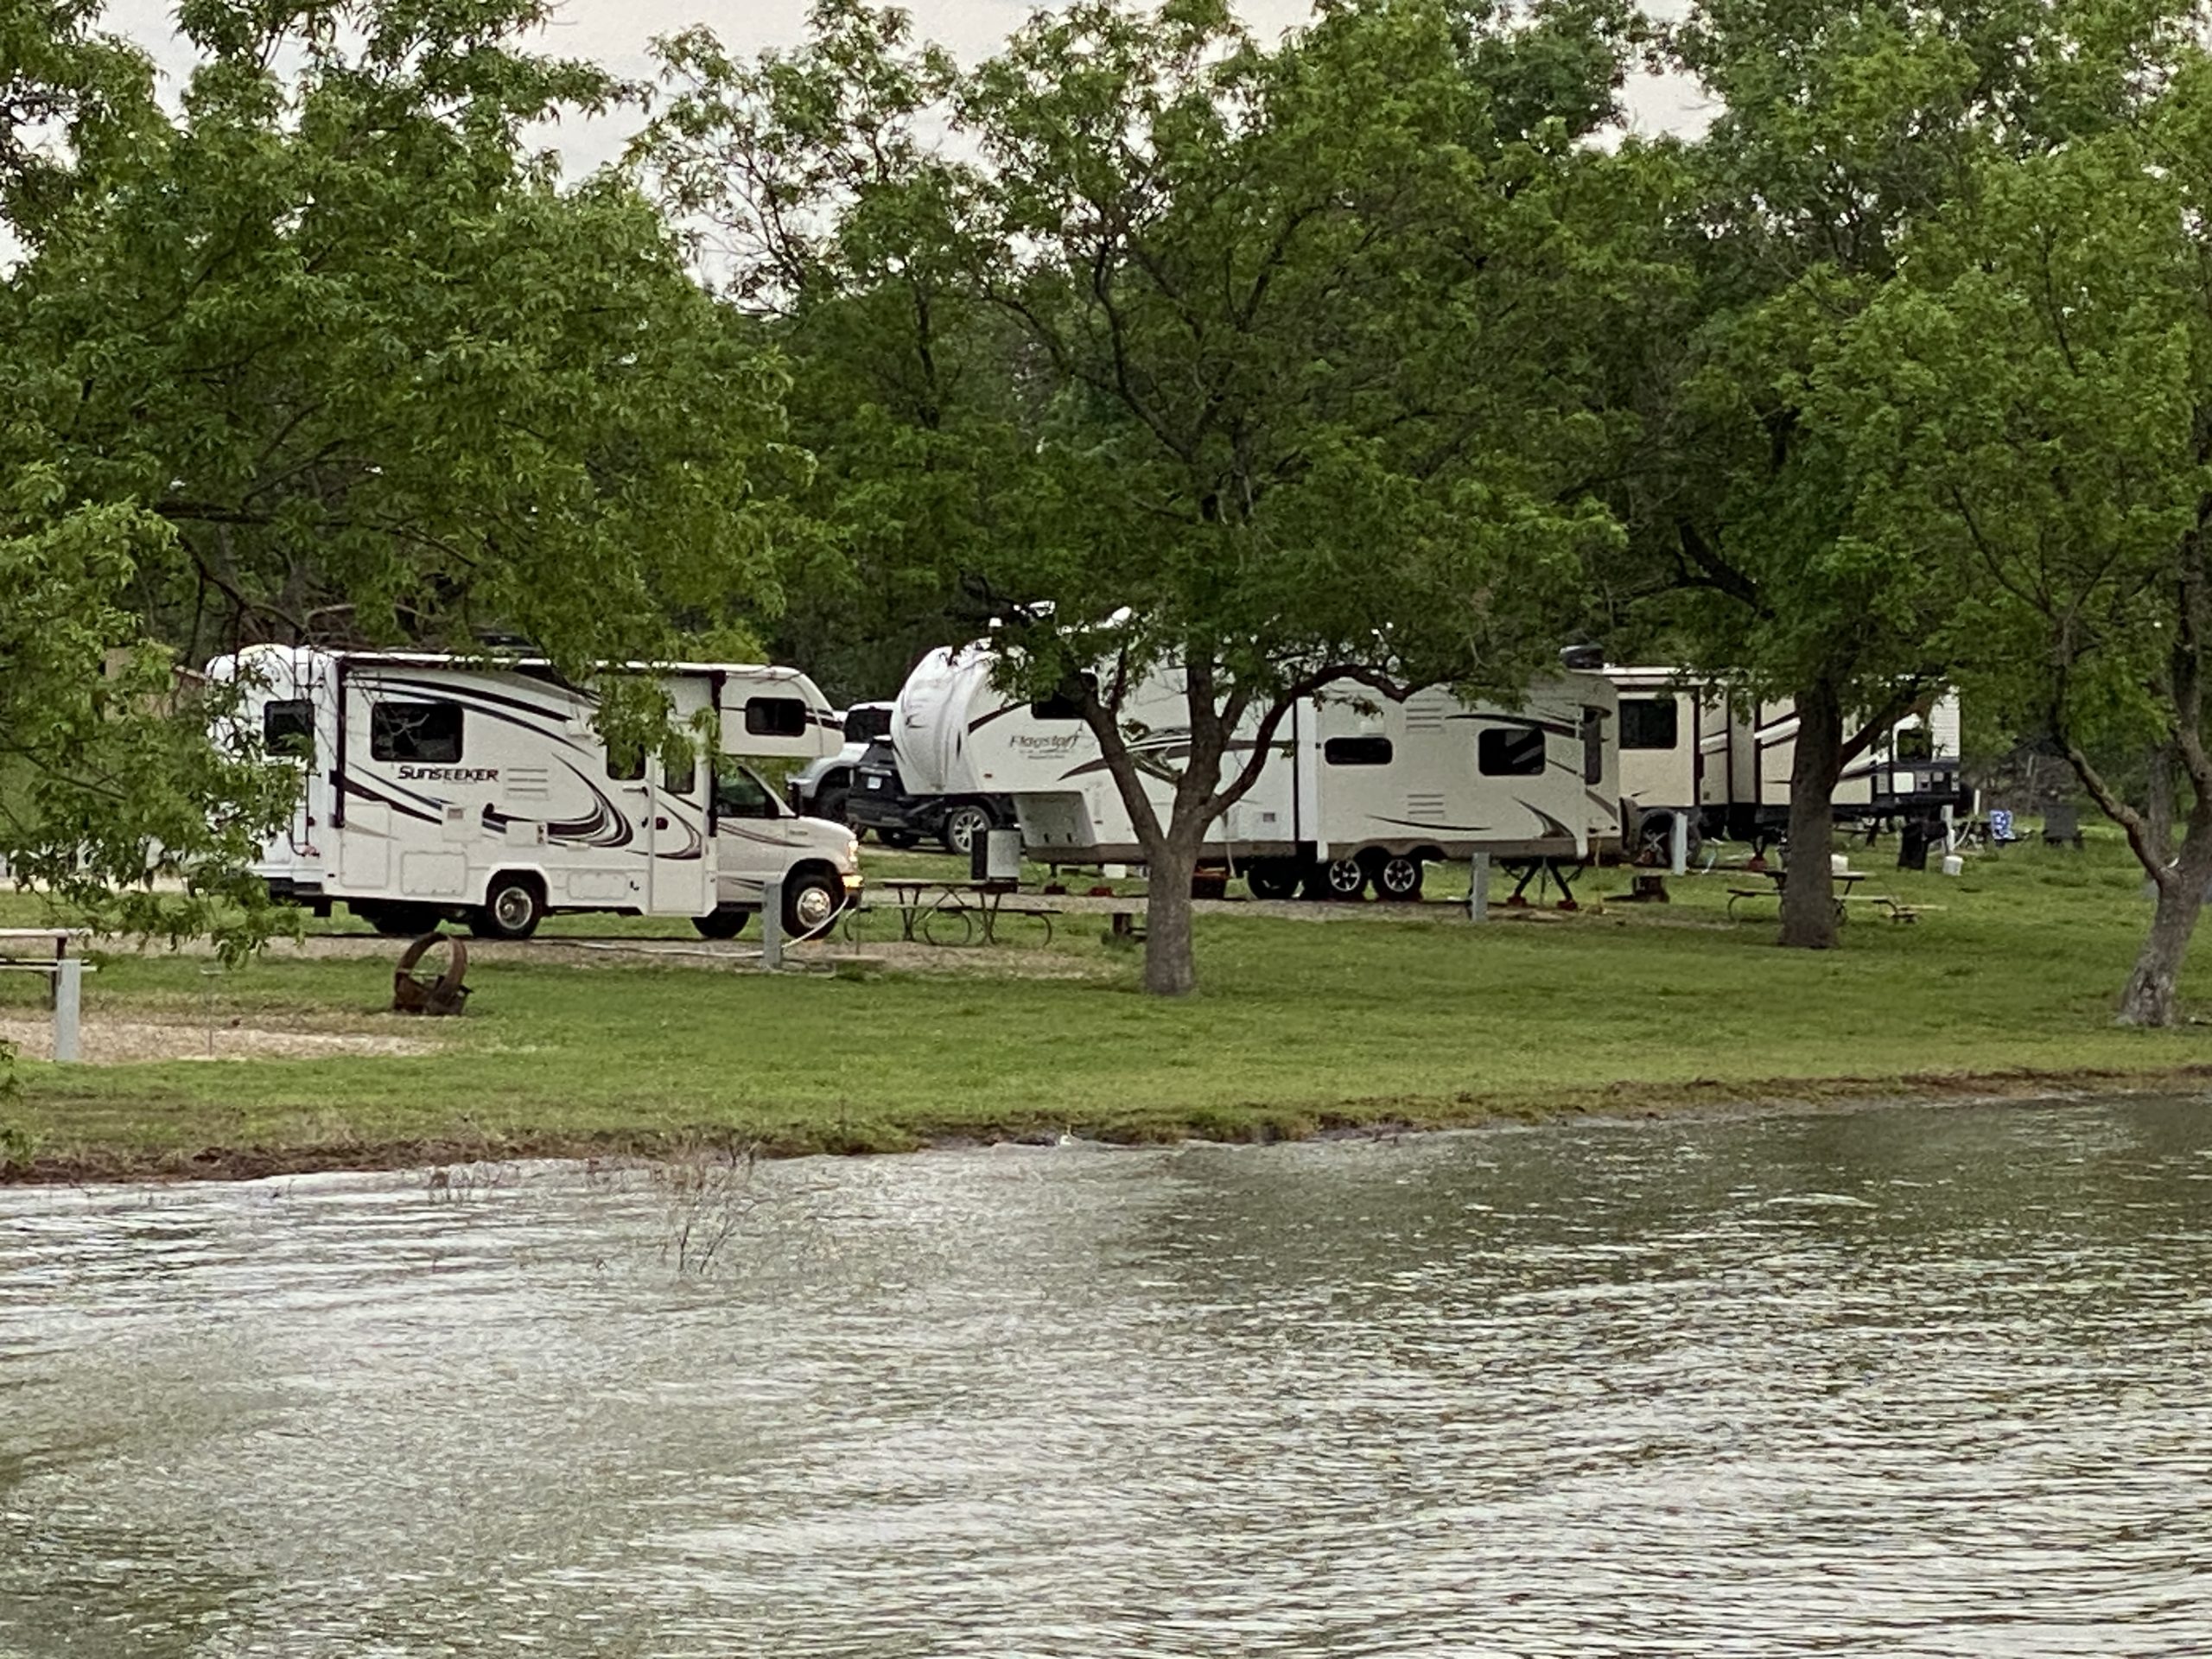 Motorhomes and towable RVs parked at an RV campground across a lake.